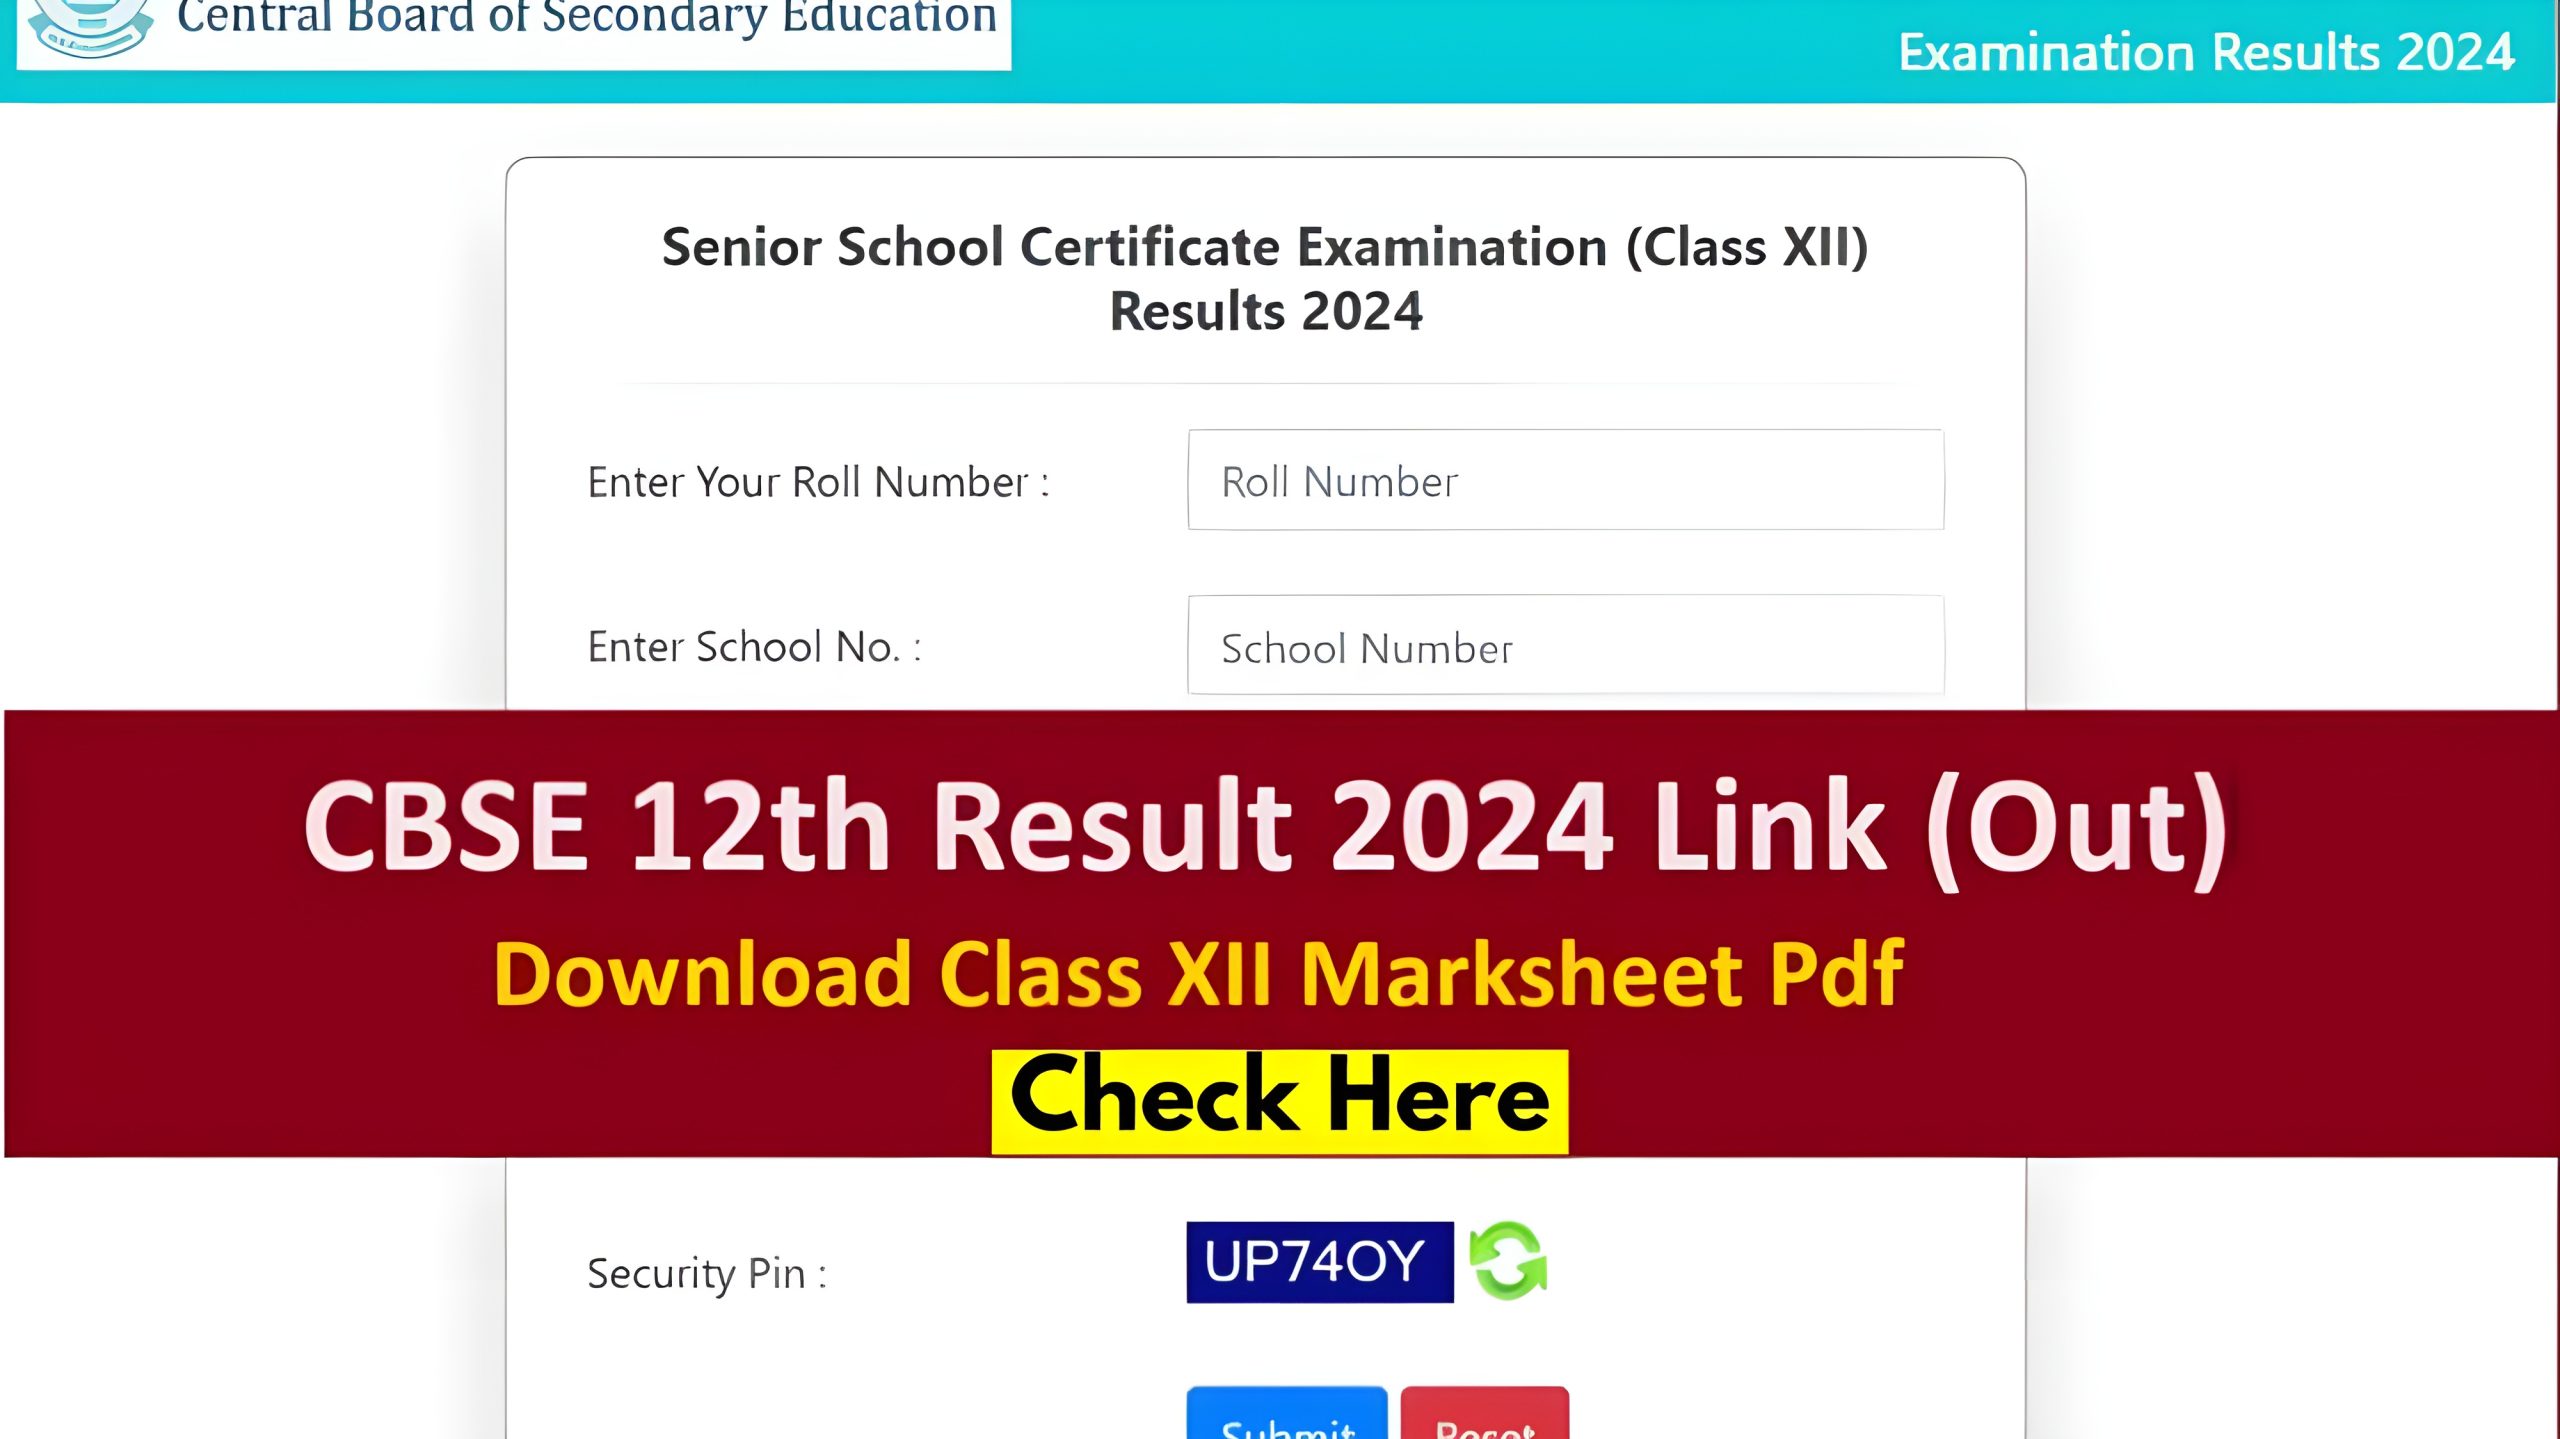 CBSE CLASS 10 AND CBSE CLASS 12 RESULTS 2024: HOW TO CHECK